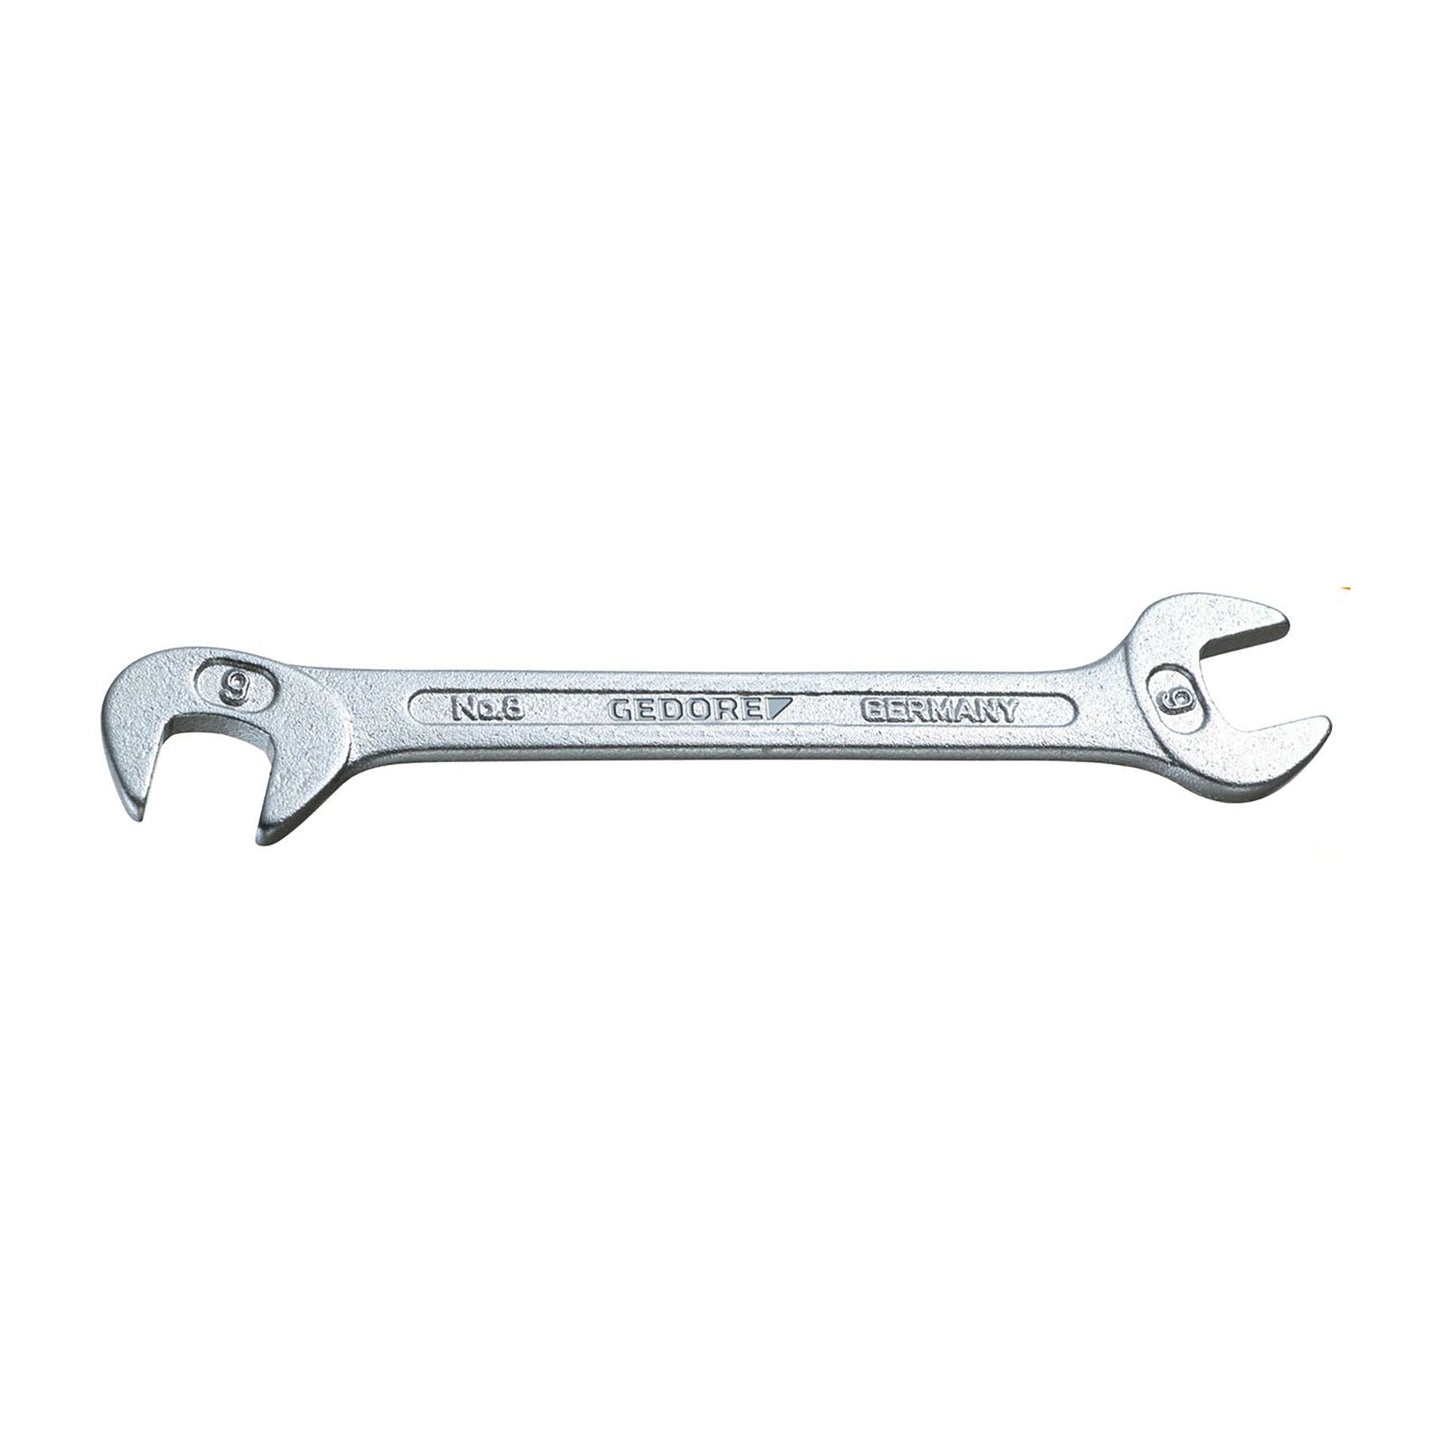 GEDORE 8 4 - Small Fixed Wrench, 4mm (6093900)